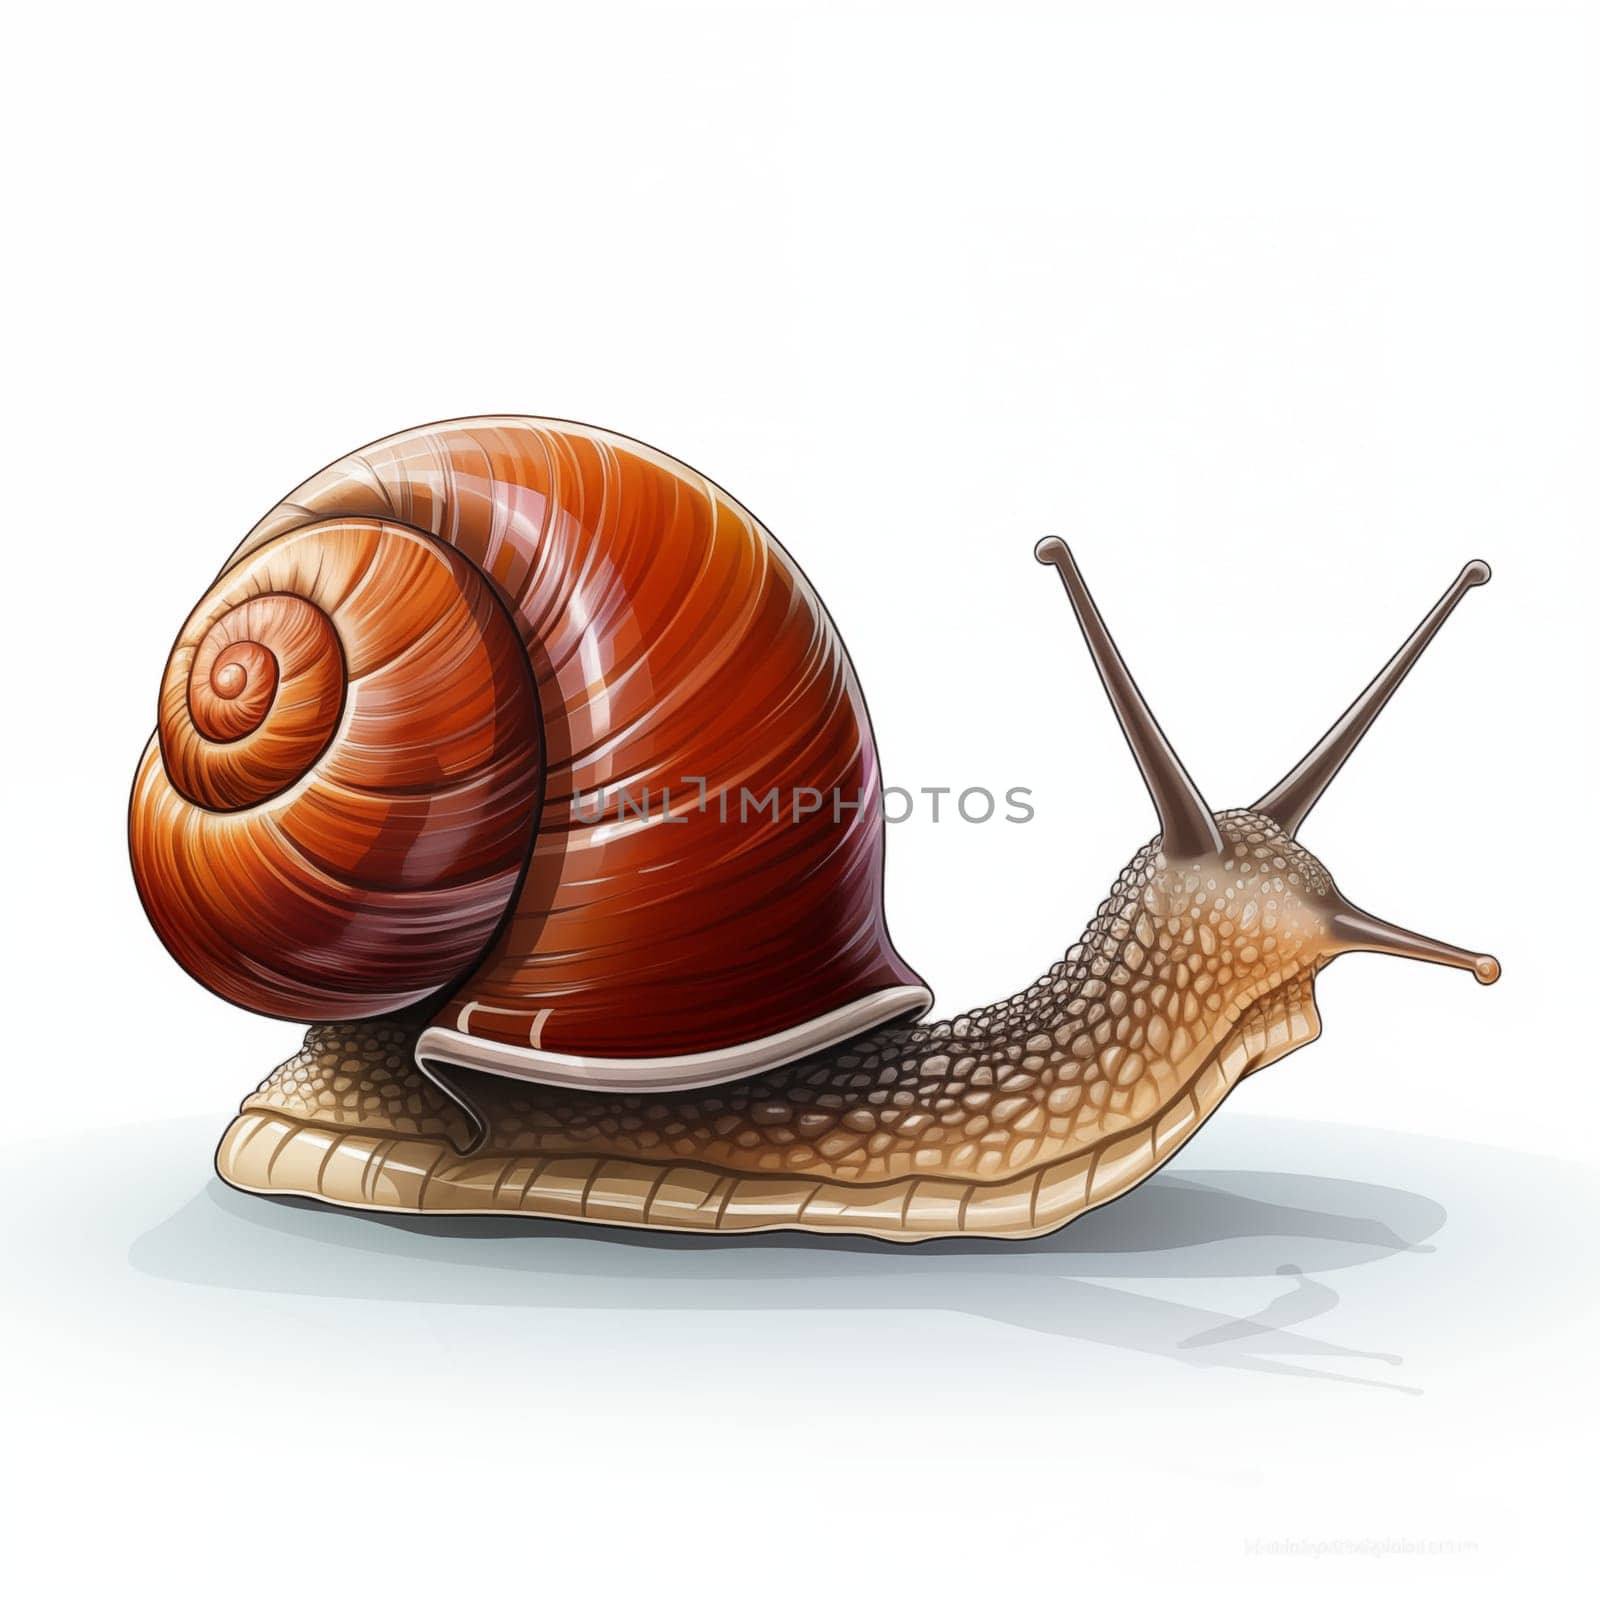 Image of a snail on a white background by ekaterinabyuksel